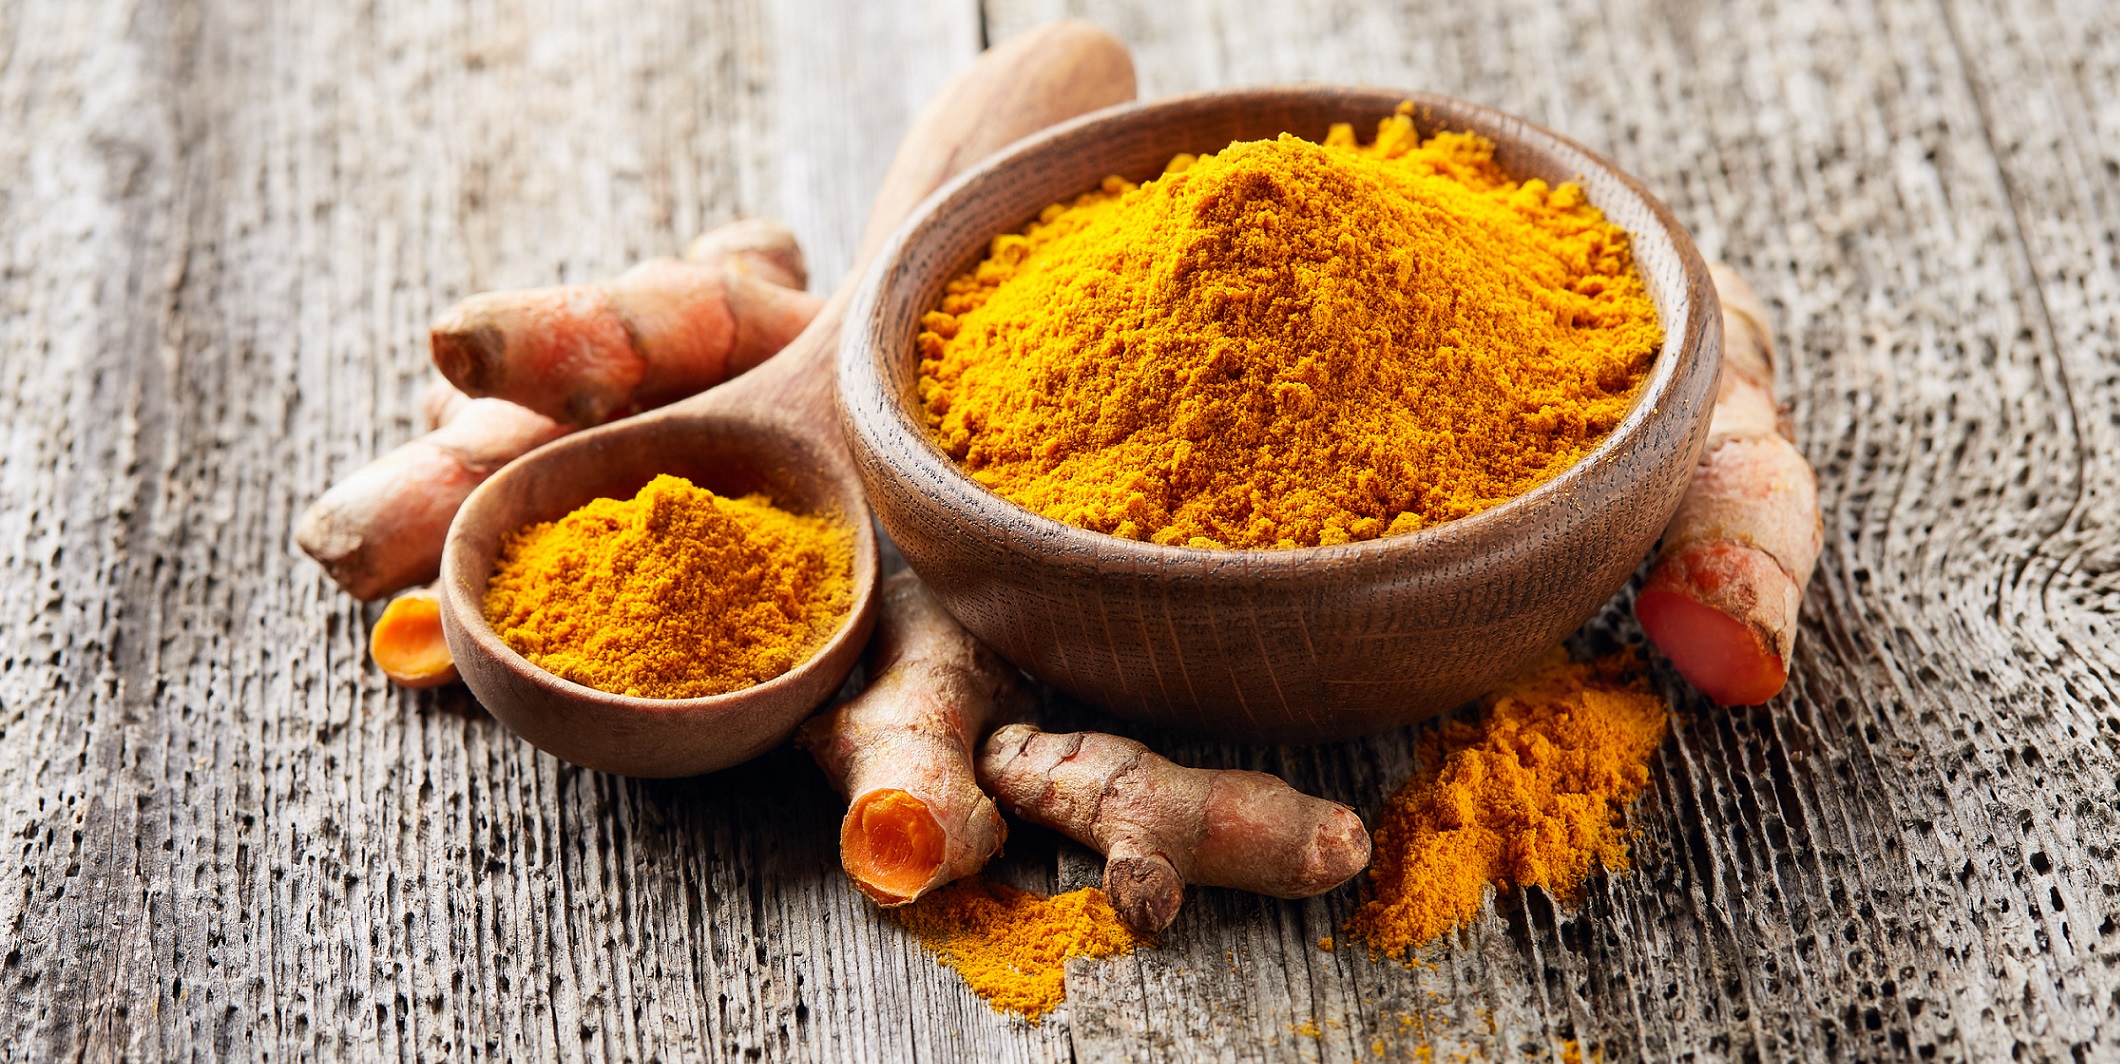 Curb inflammation naturally with turmeric